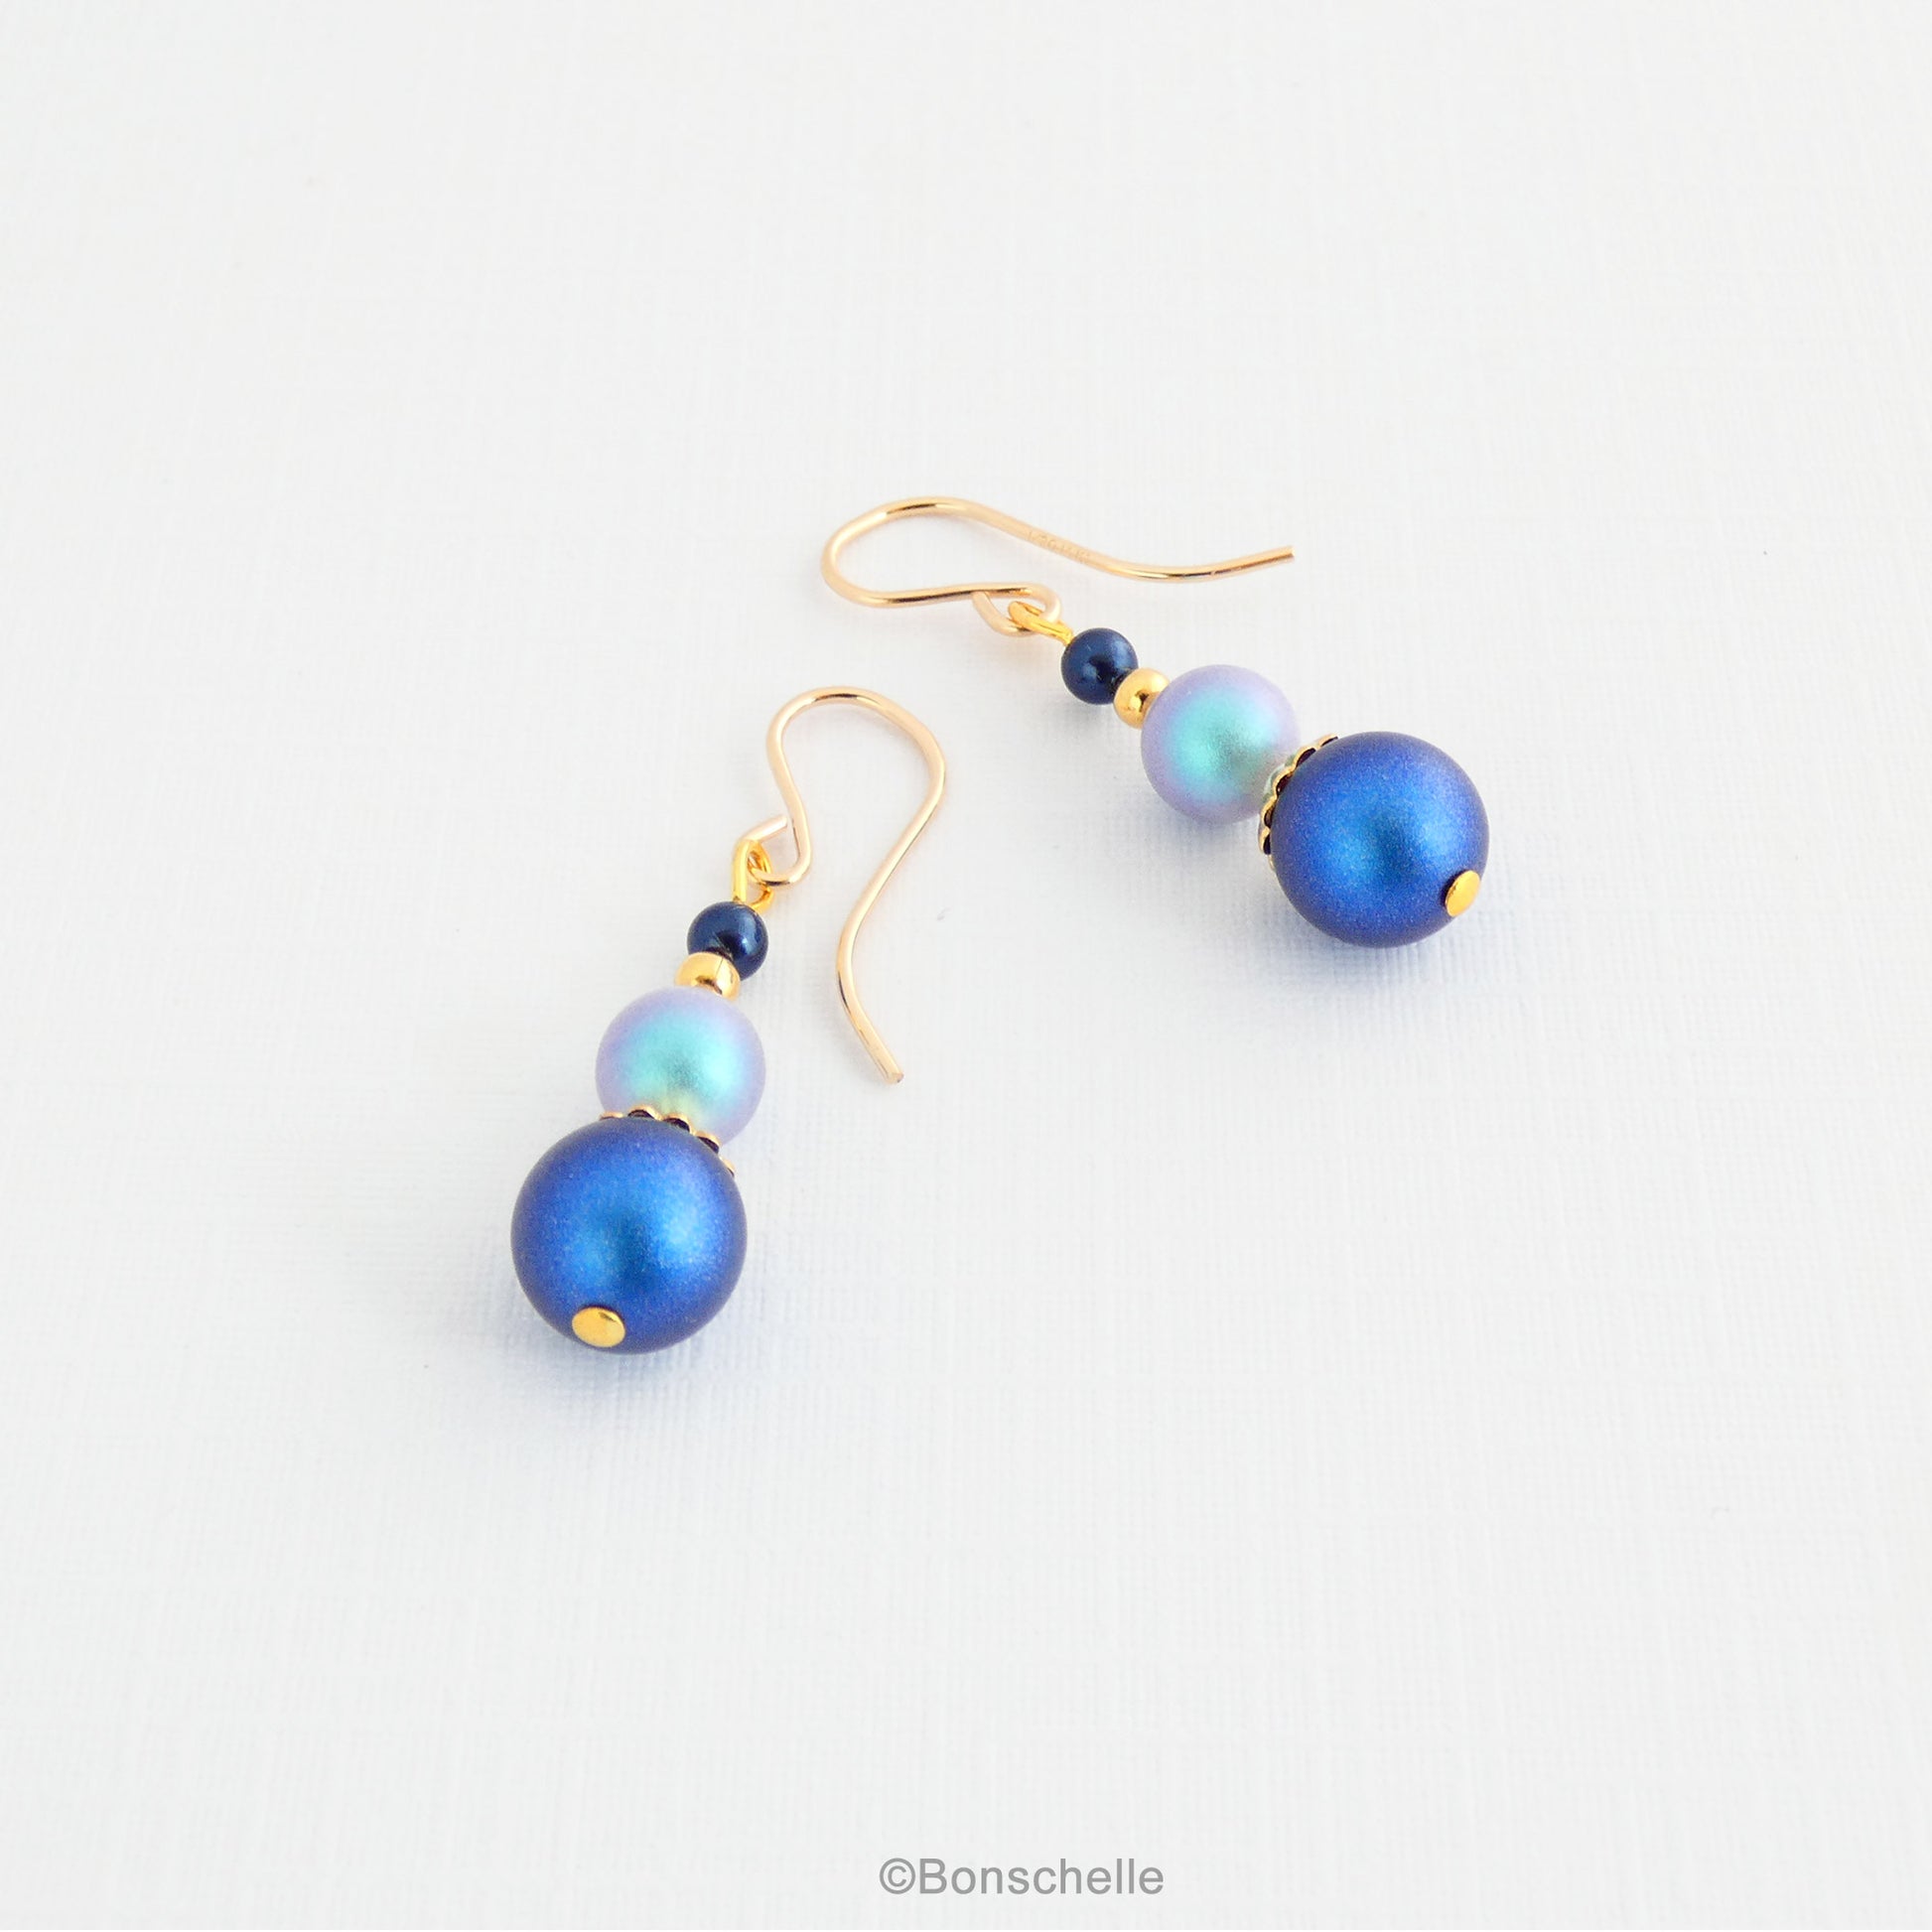 Dark, medium, and pale blue Swarovski crystal pearl beads with 14K gold filled earwires for women lying on a surface